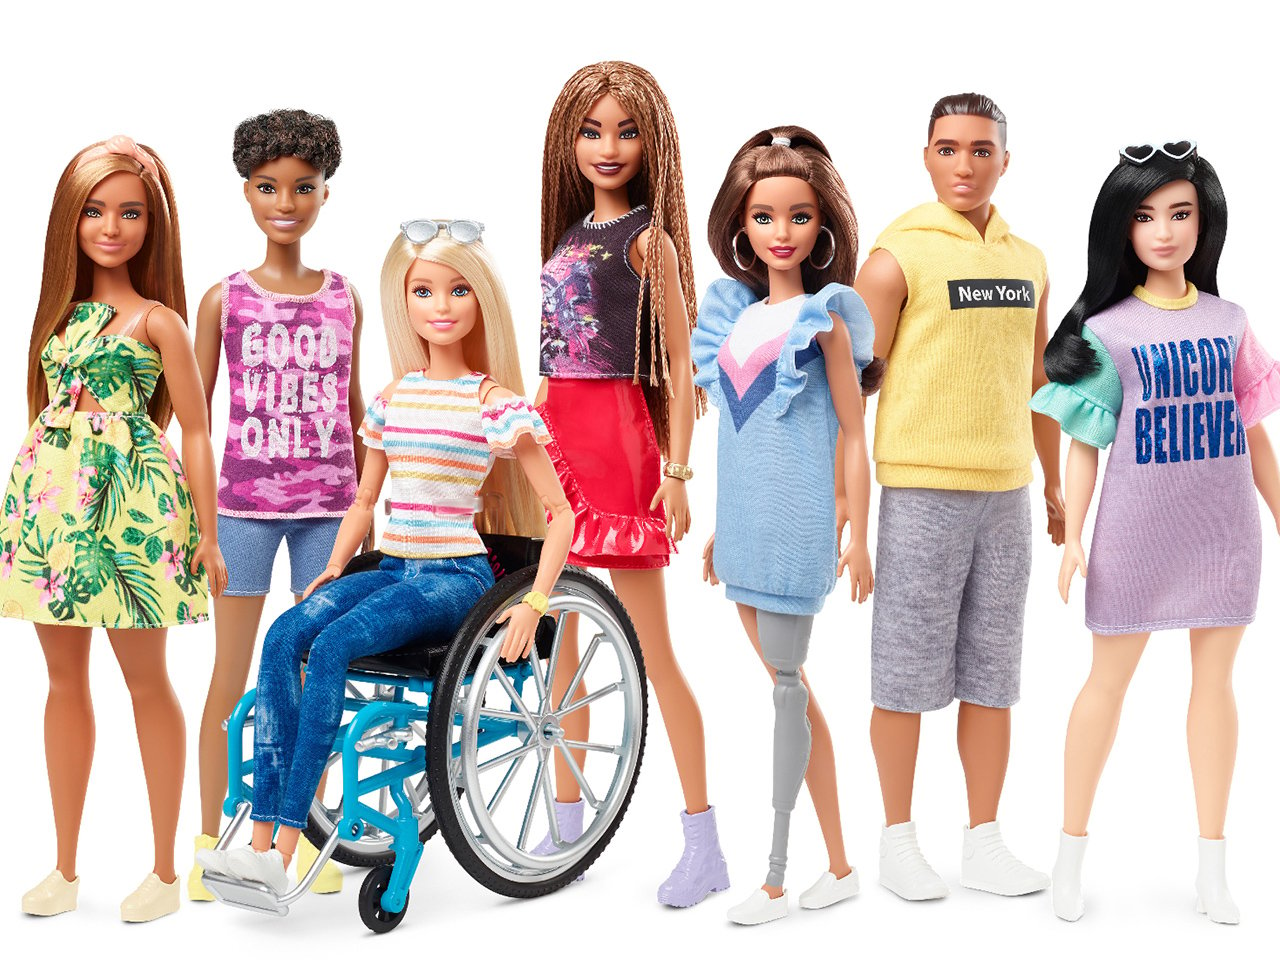 The new 2019 Barbie Fashionistas are 